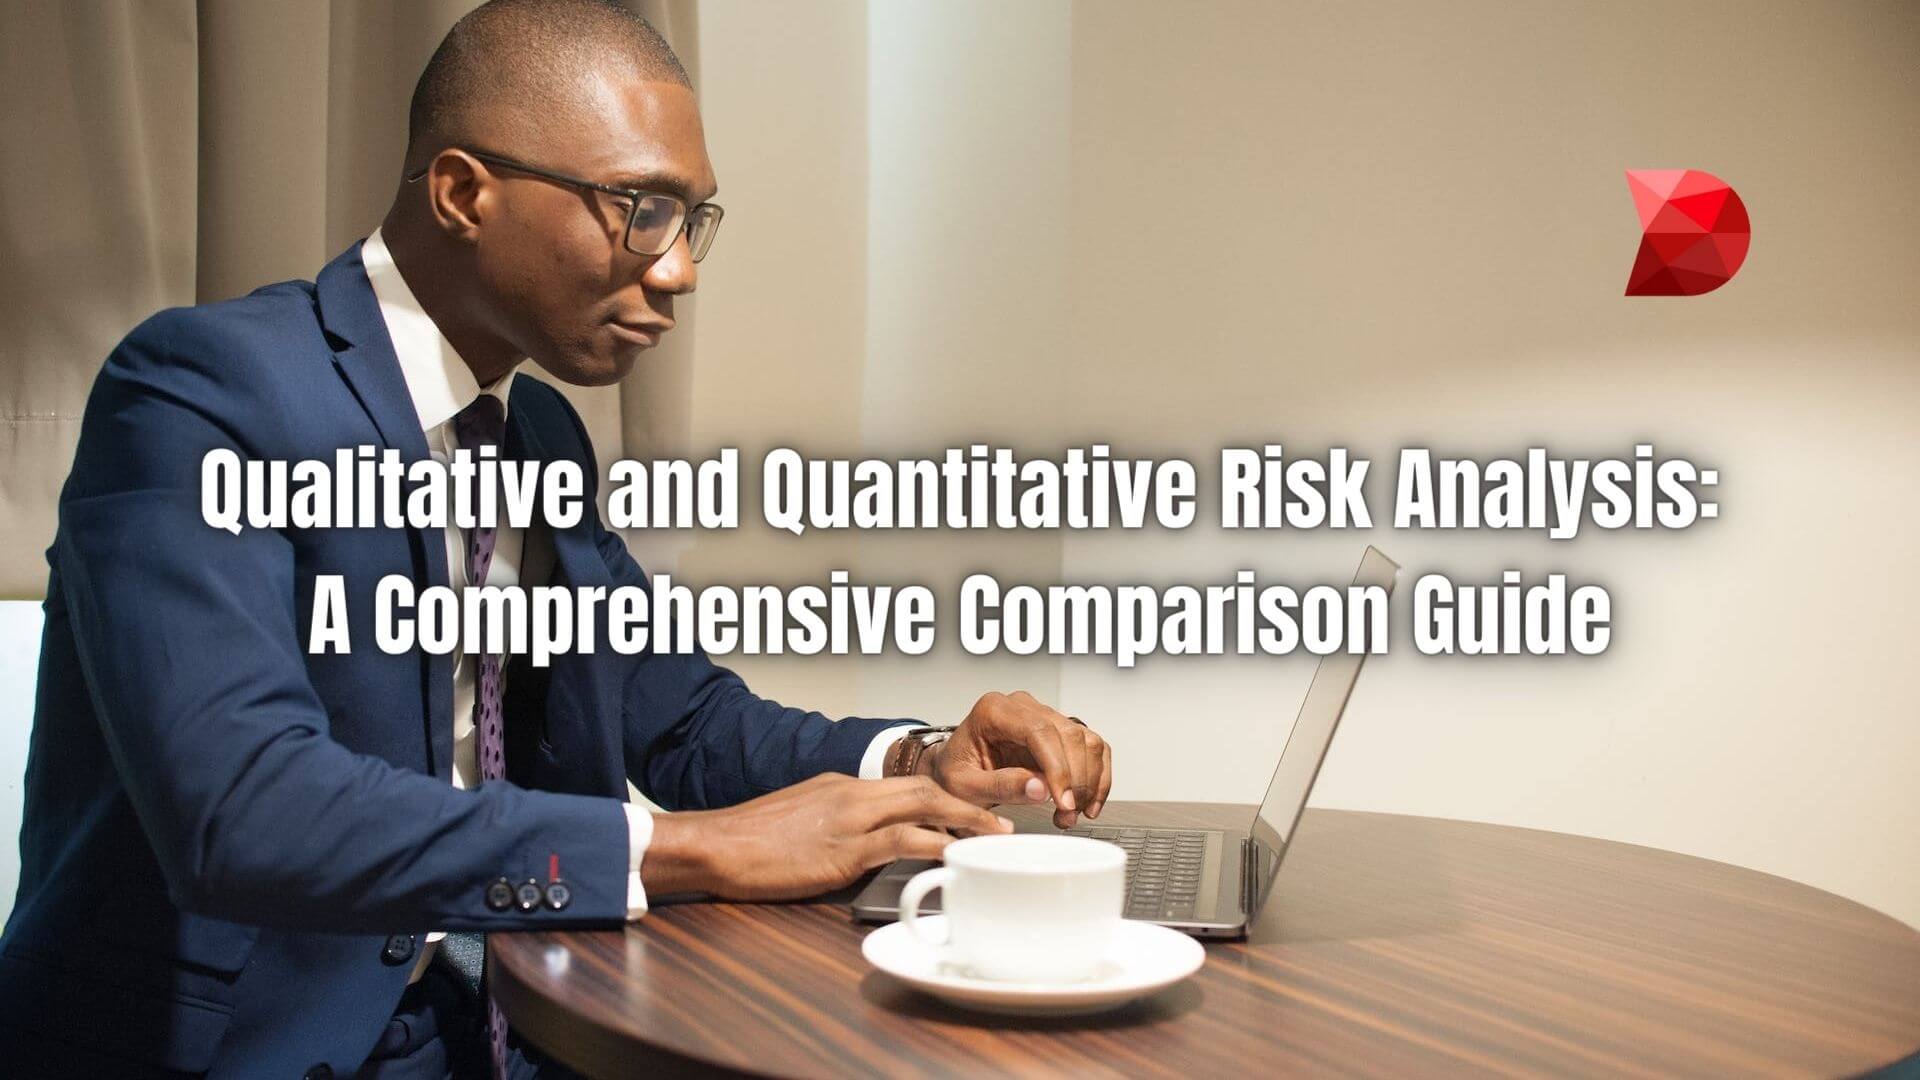 Navigate risk confidently with our in-depth guide. Learn the nuances of Qualitative vs Quantitative Risk Analysis for robust decision-making.